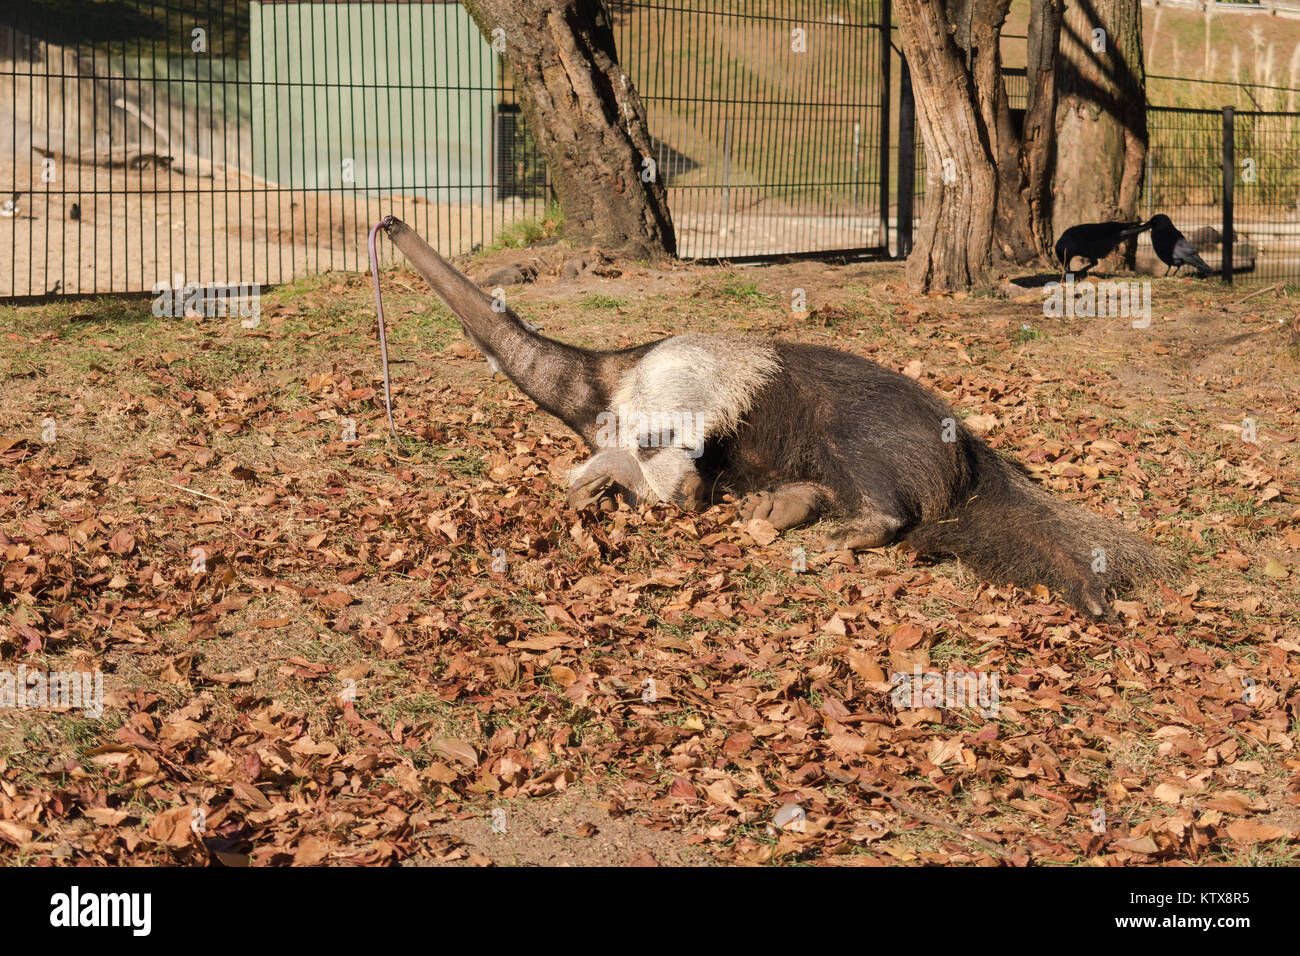 Giant anteater, Myrmecophaga tridactyla with its tongue out in a ground full of brown dry leaves Stock Photo